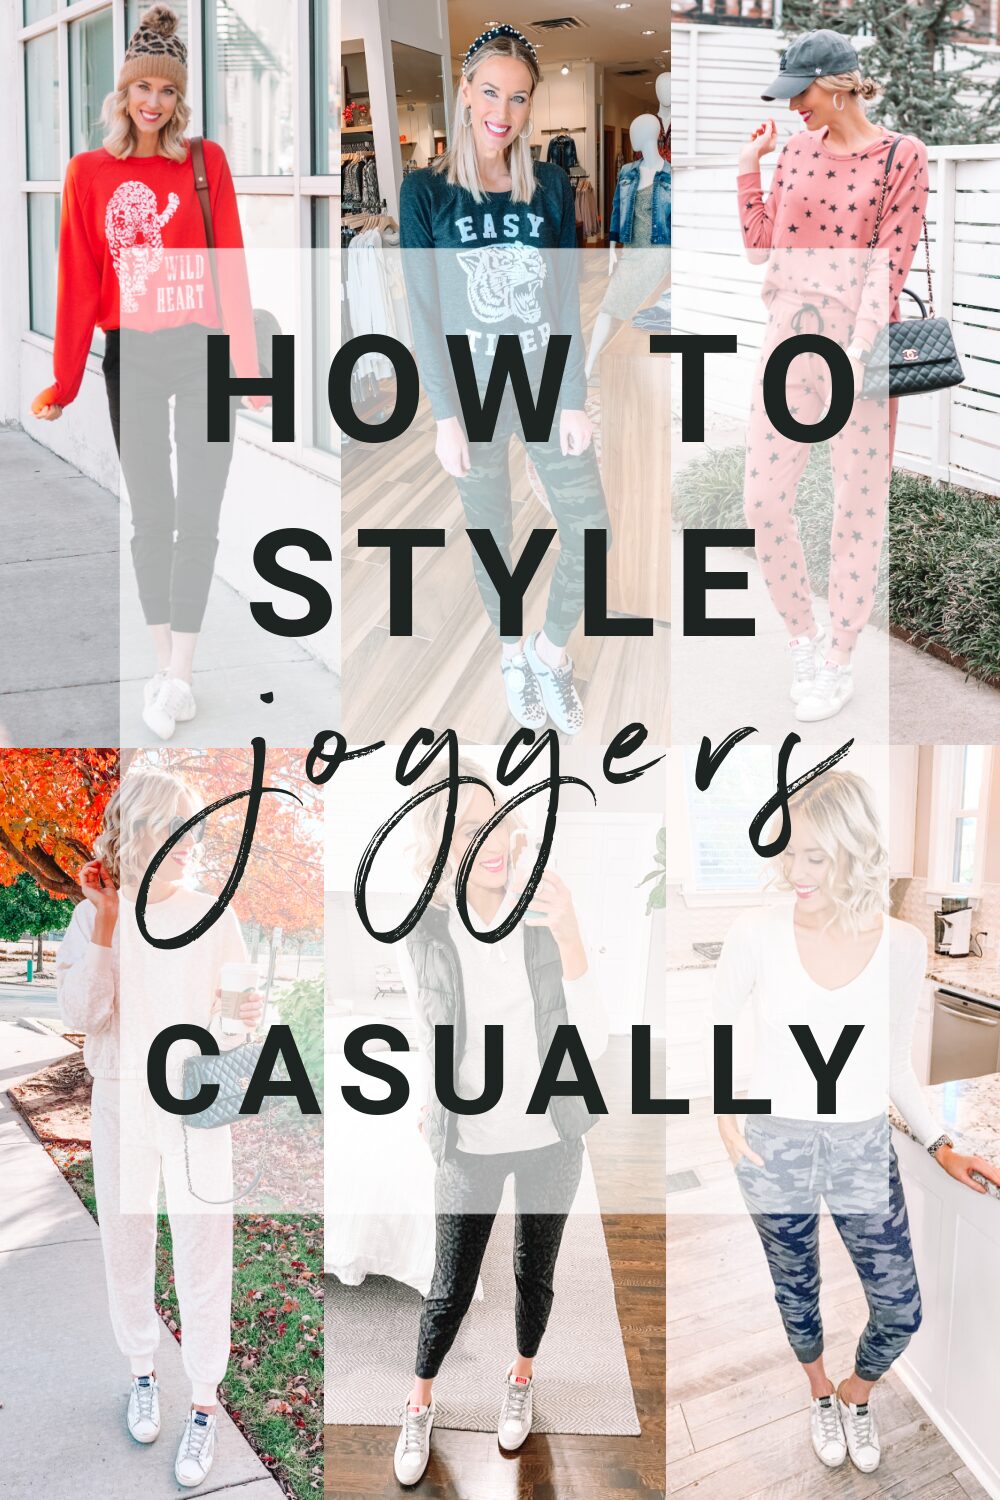 How to style a flannel shirt - 4 easy outfit ideas - rosey kate